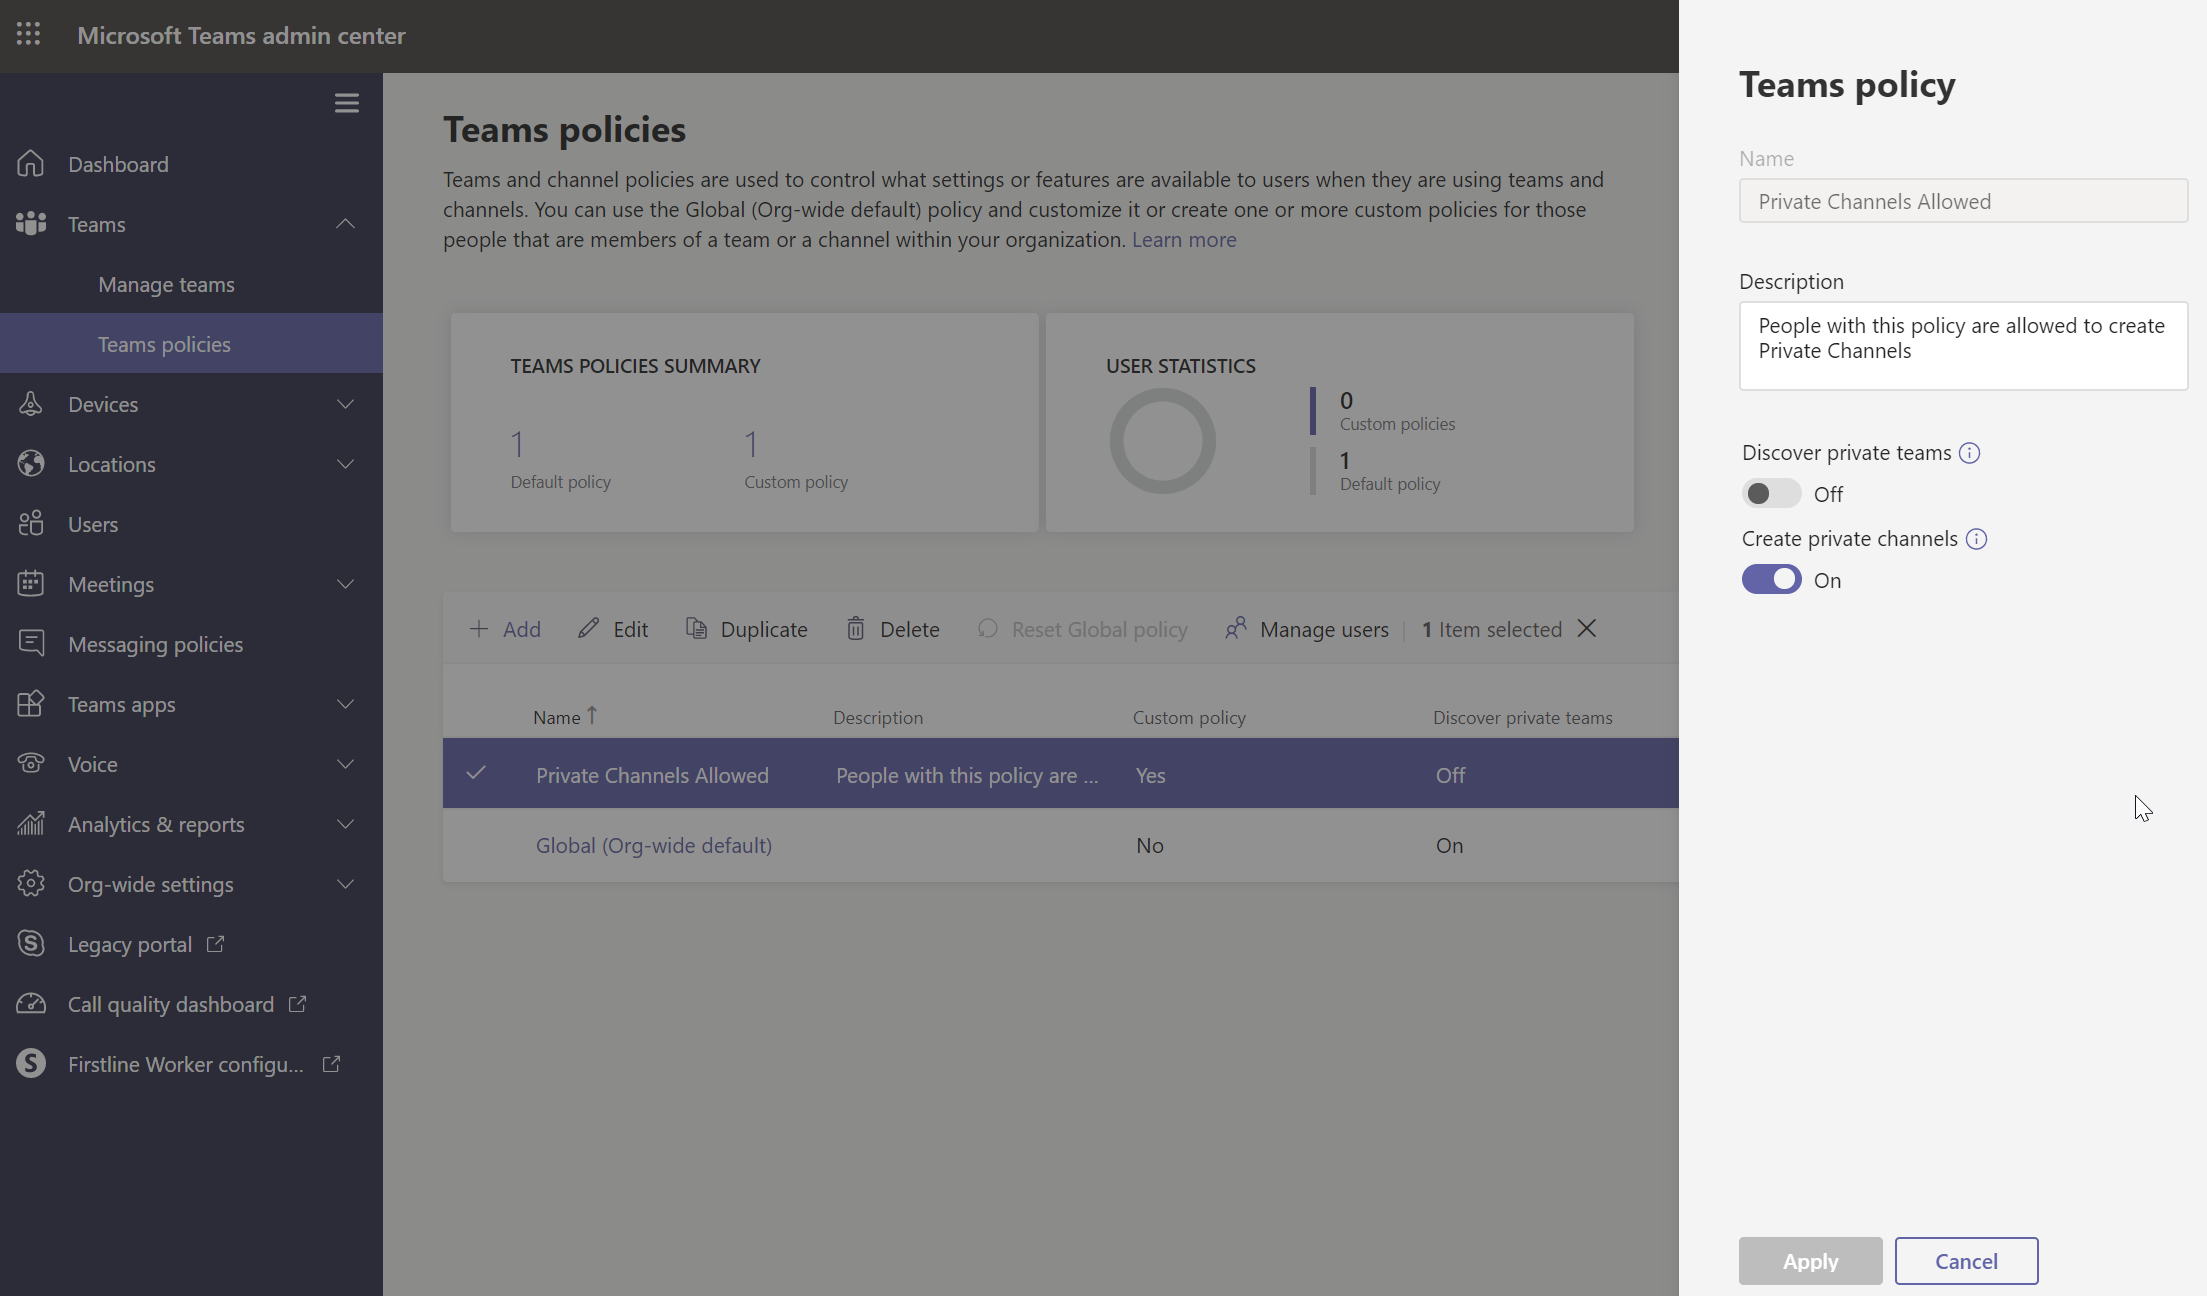 Private channel settings in Microsoft Teams